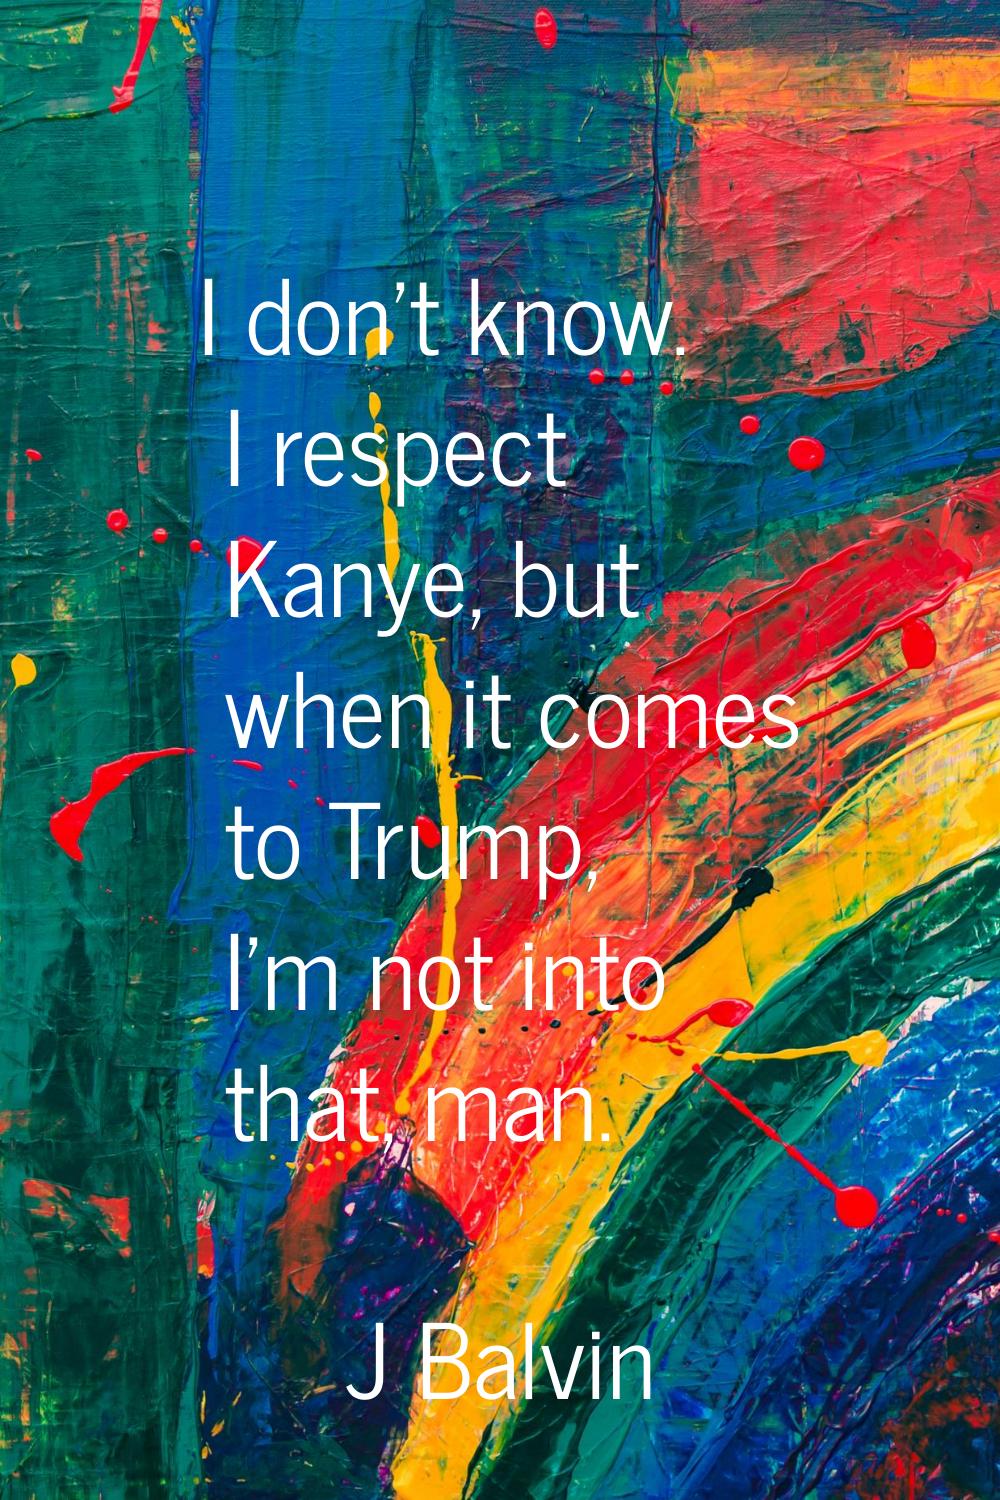 I don't know. I respect Kanye, but when it comes to Trump, I'm not into that, man.